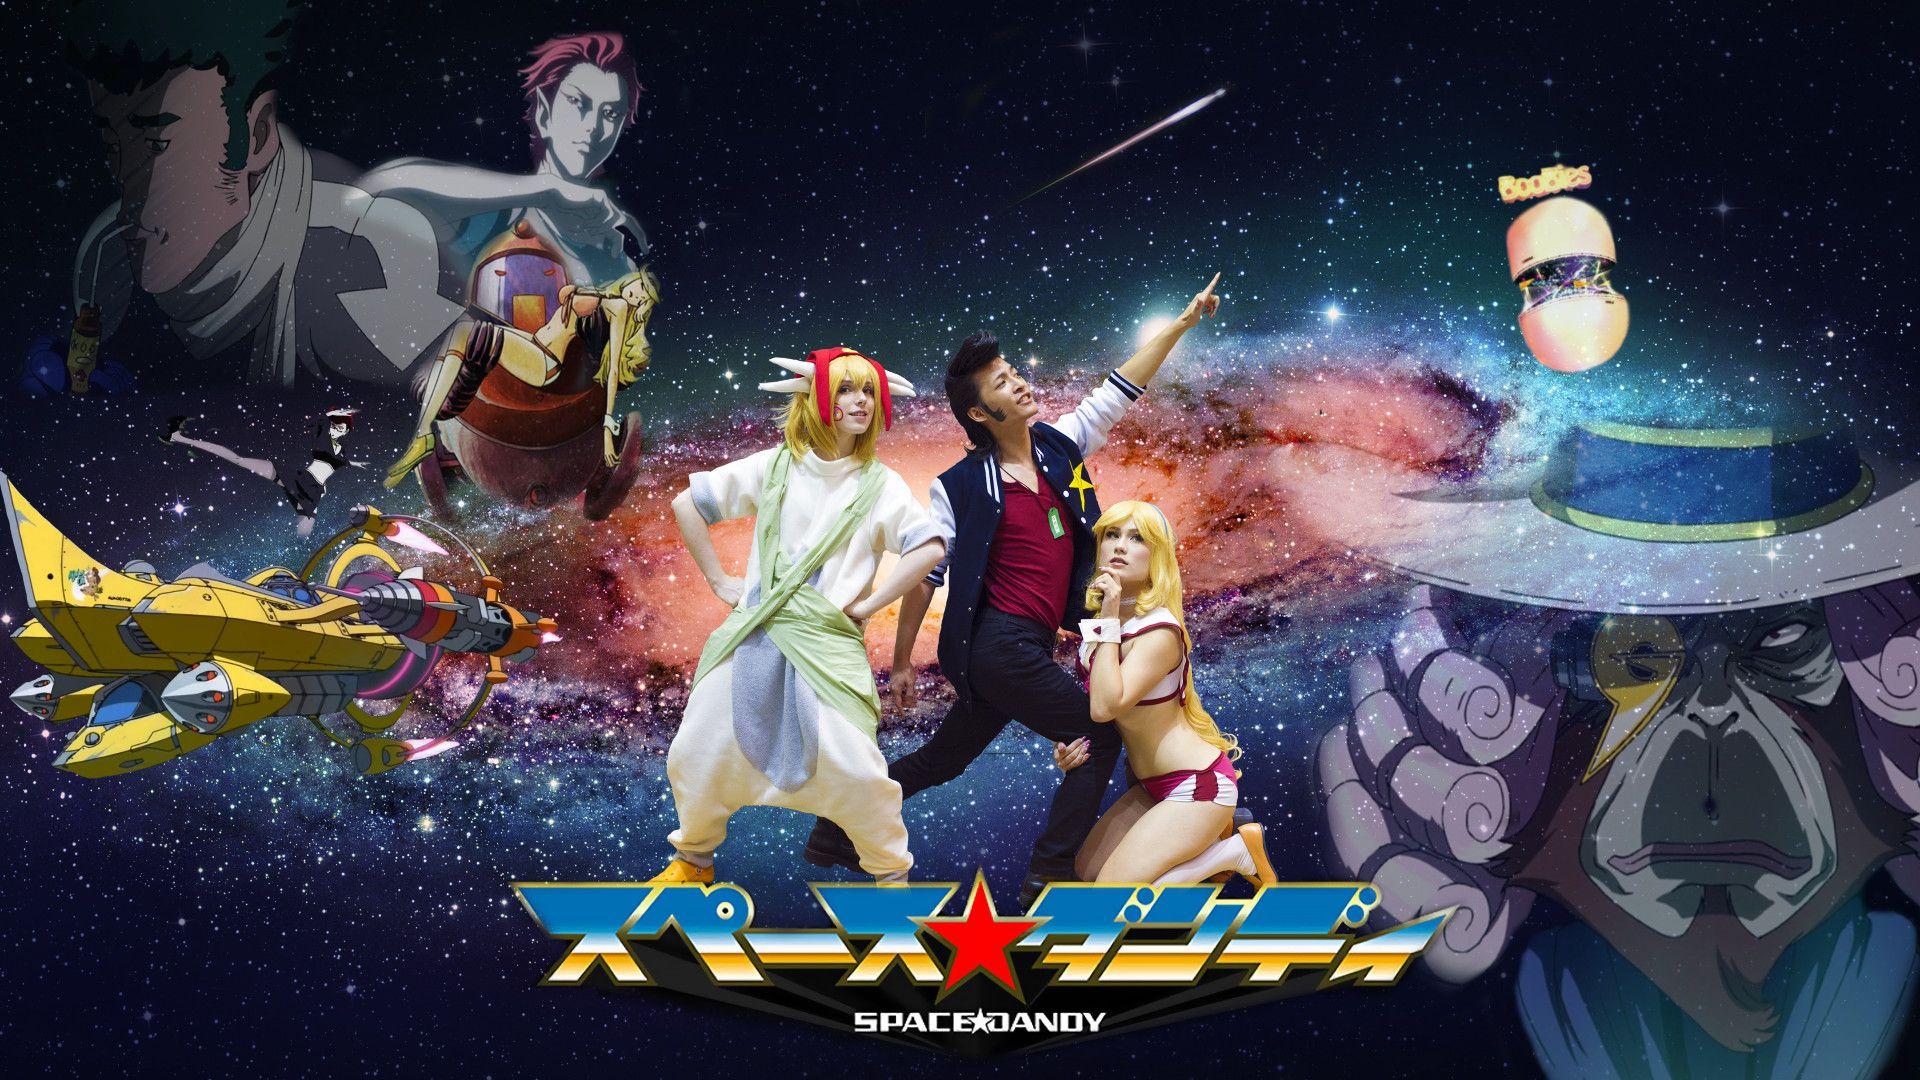 Cosplay) Space Dandy Movie Poster attempt